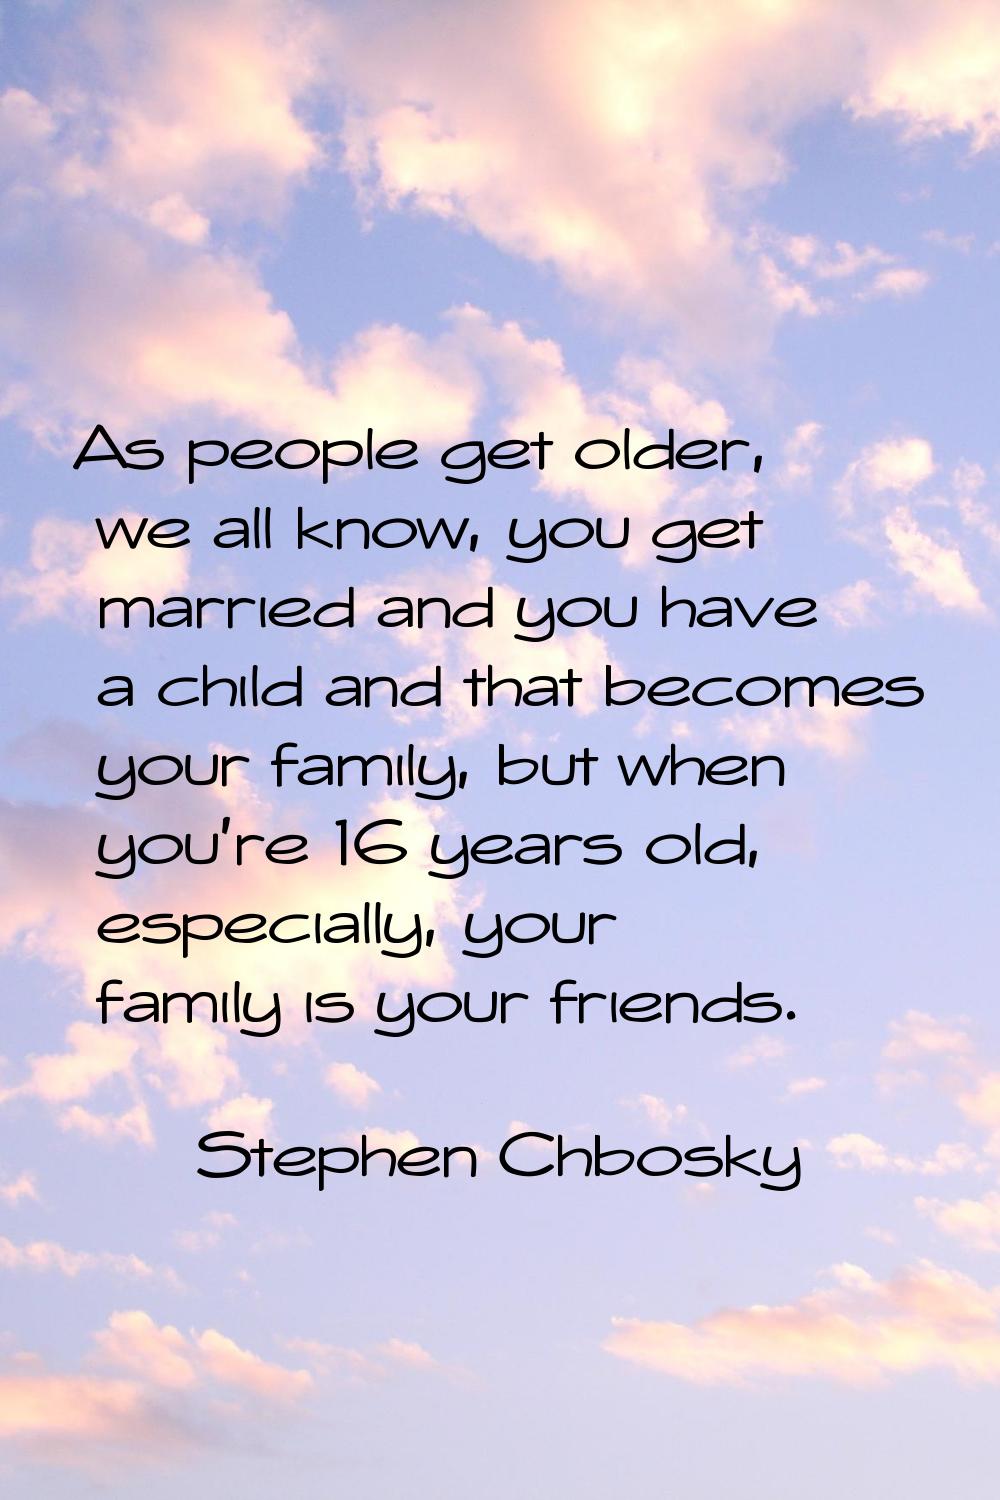 As people get older, we all know, you get married and you have a child and that becomes your family